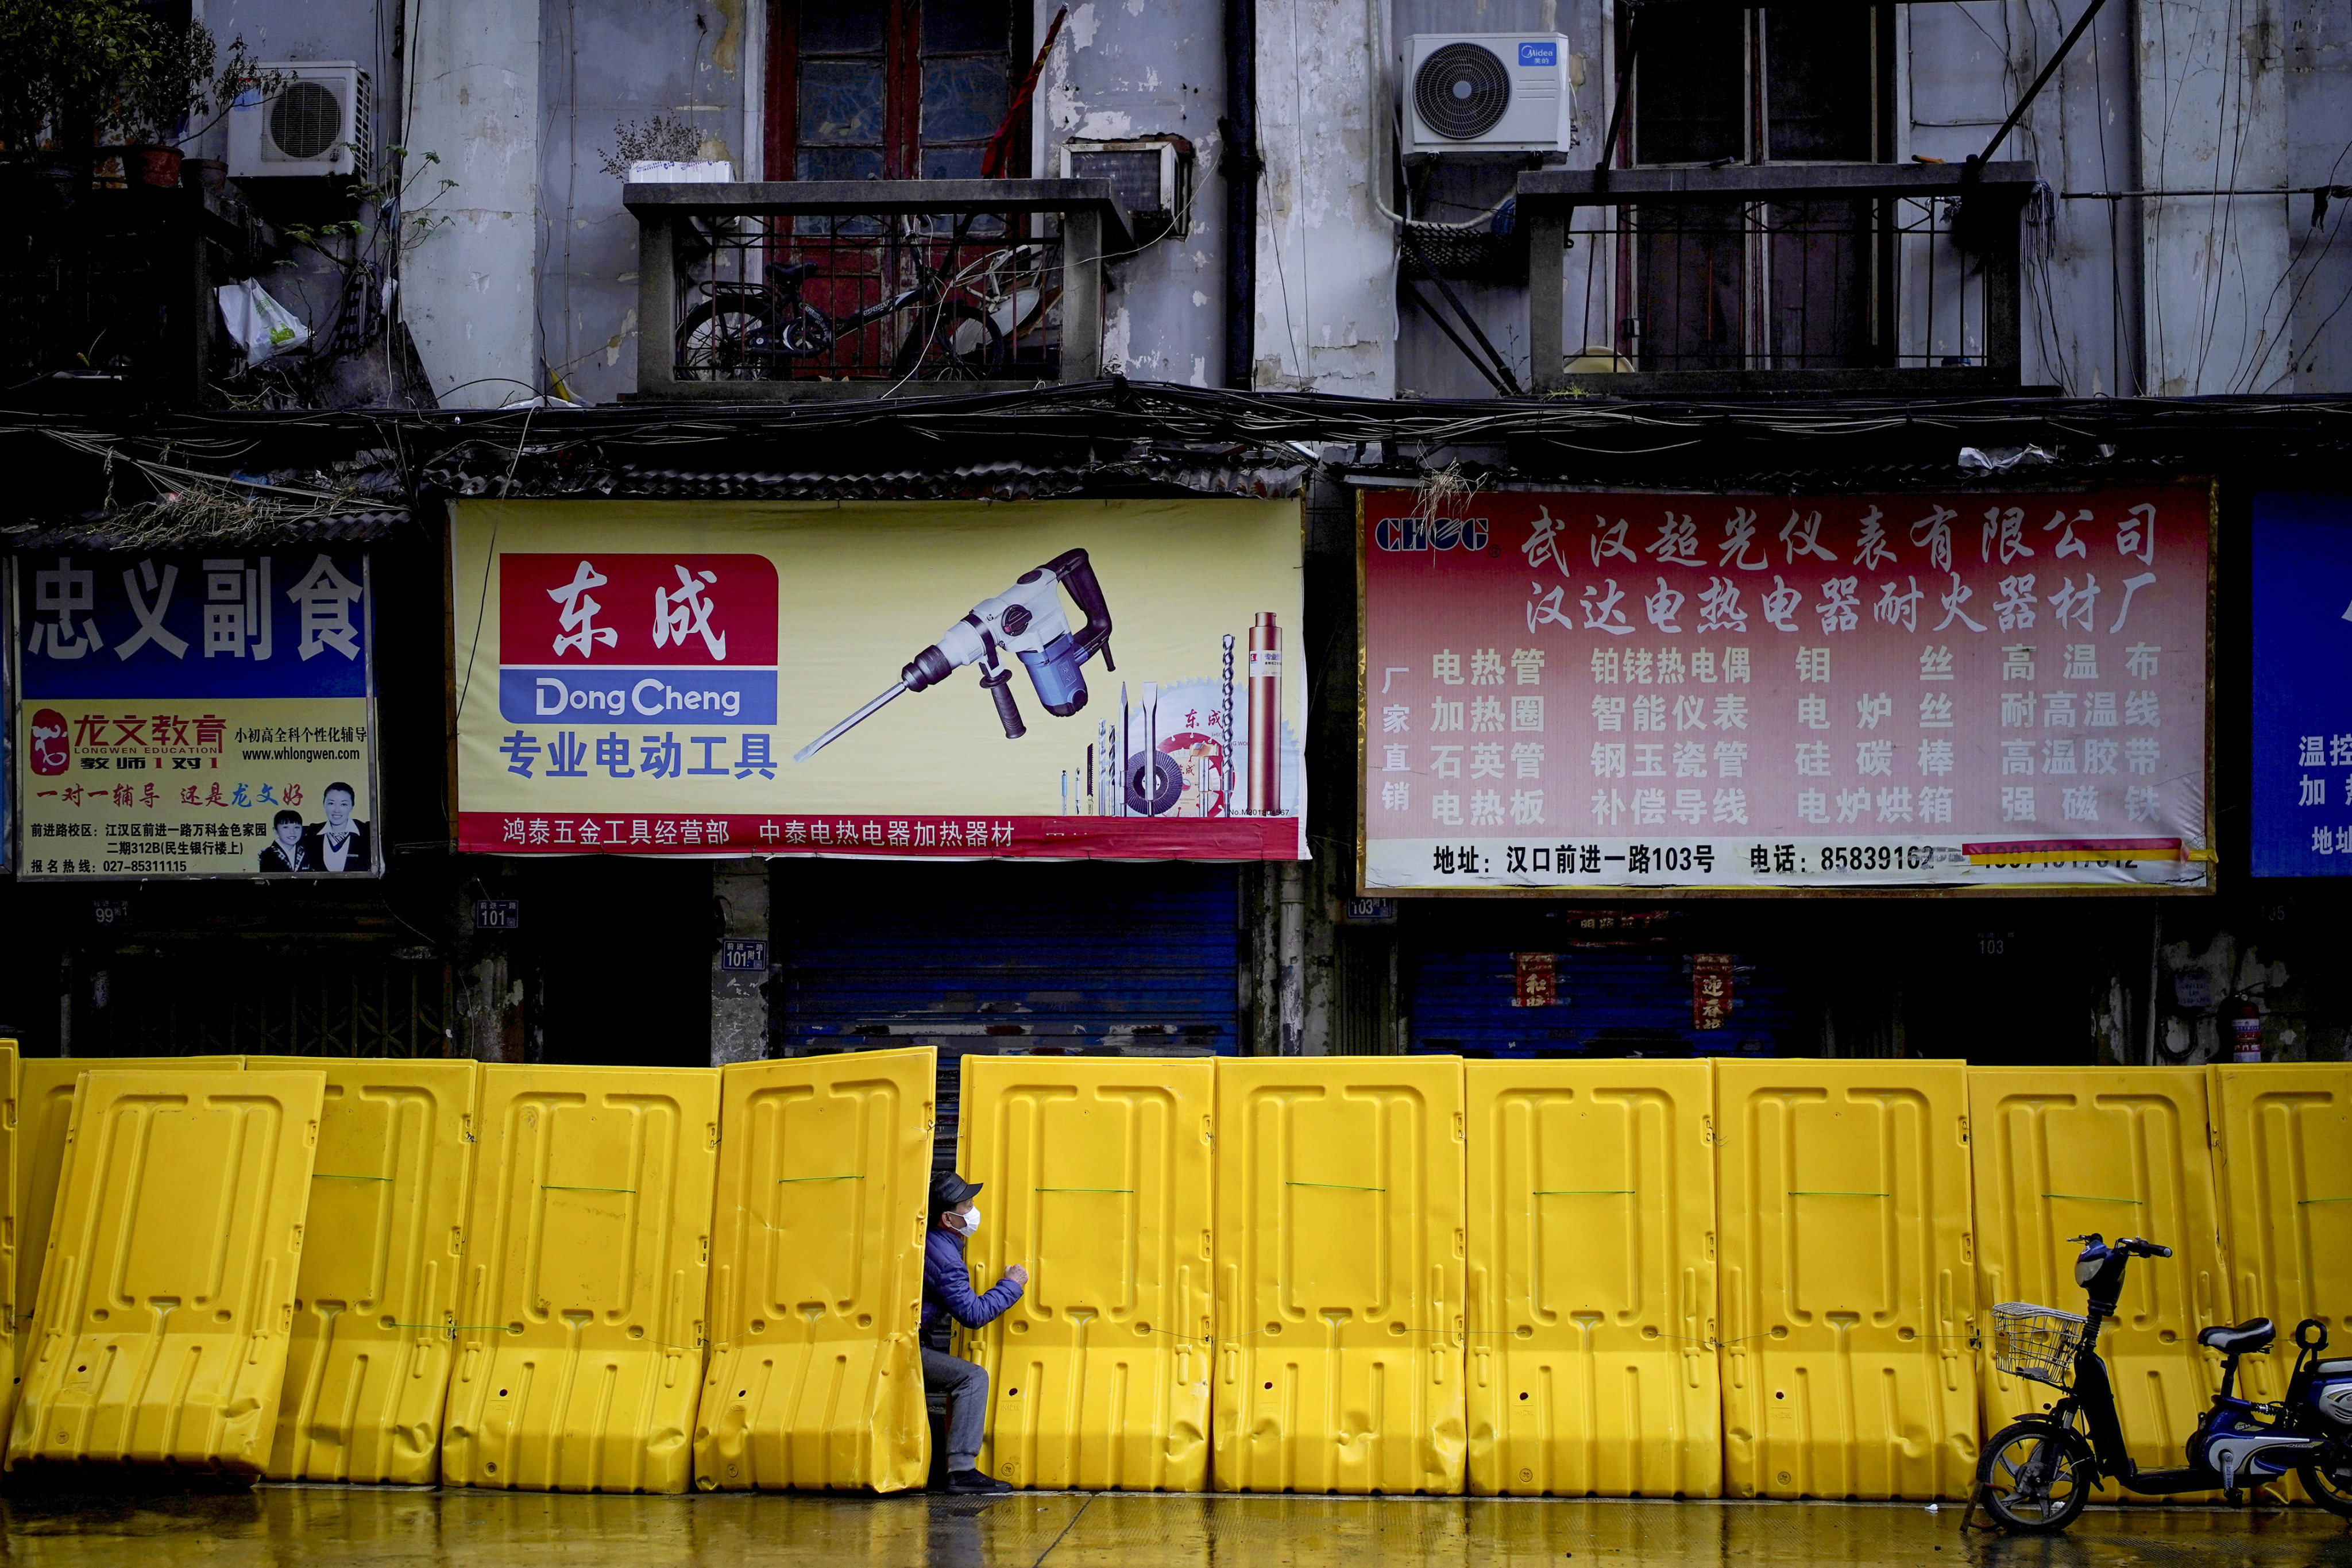 Health Insight covered the Covid-19 outbreak in Wuhan in early 2020 and has been critical of the healthcare system. It is one of two online media outlets blocked in China this week. Photo: Reuters